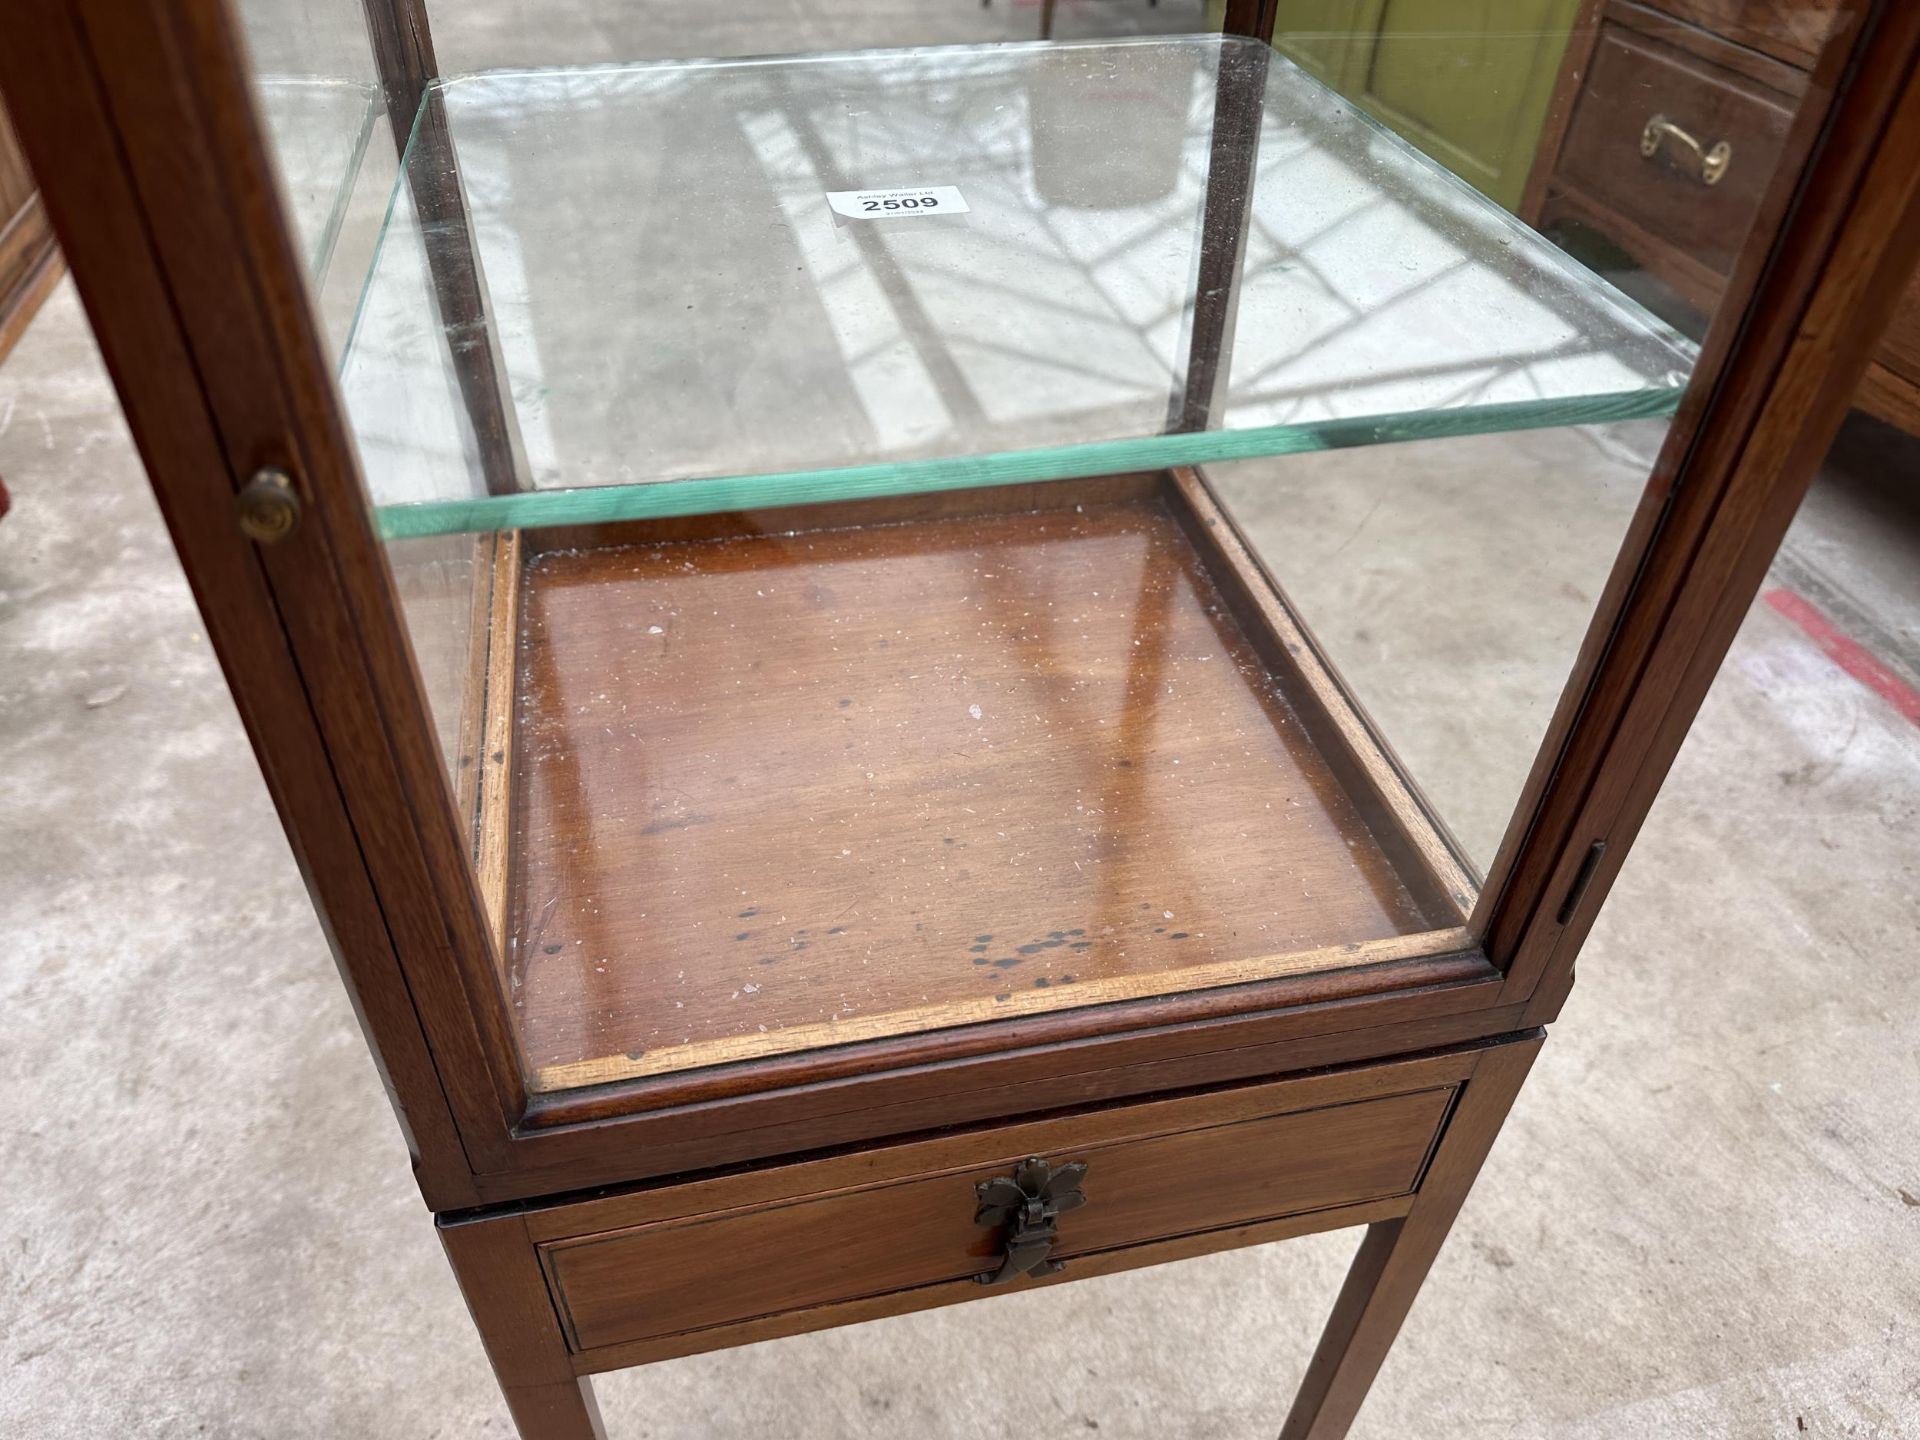 AN EDWARDIAN MAHOGANY BIJOUTERIE CABINET WITH SINGLE DRAWER - 14"SQUARE - Image 3 of 4